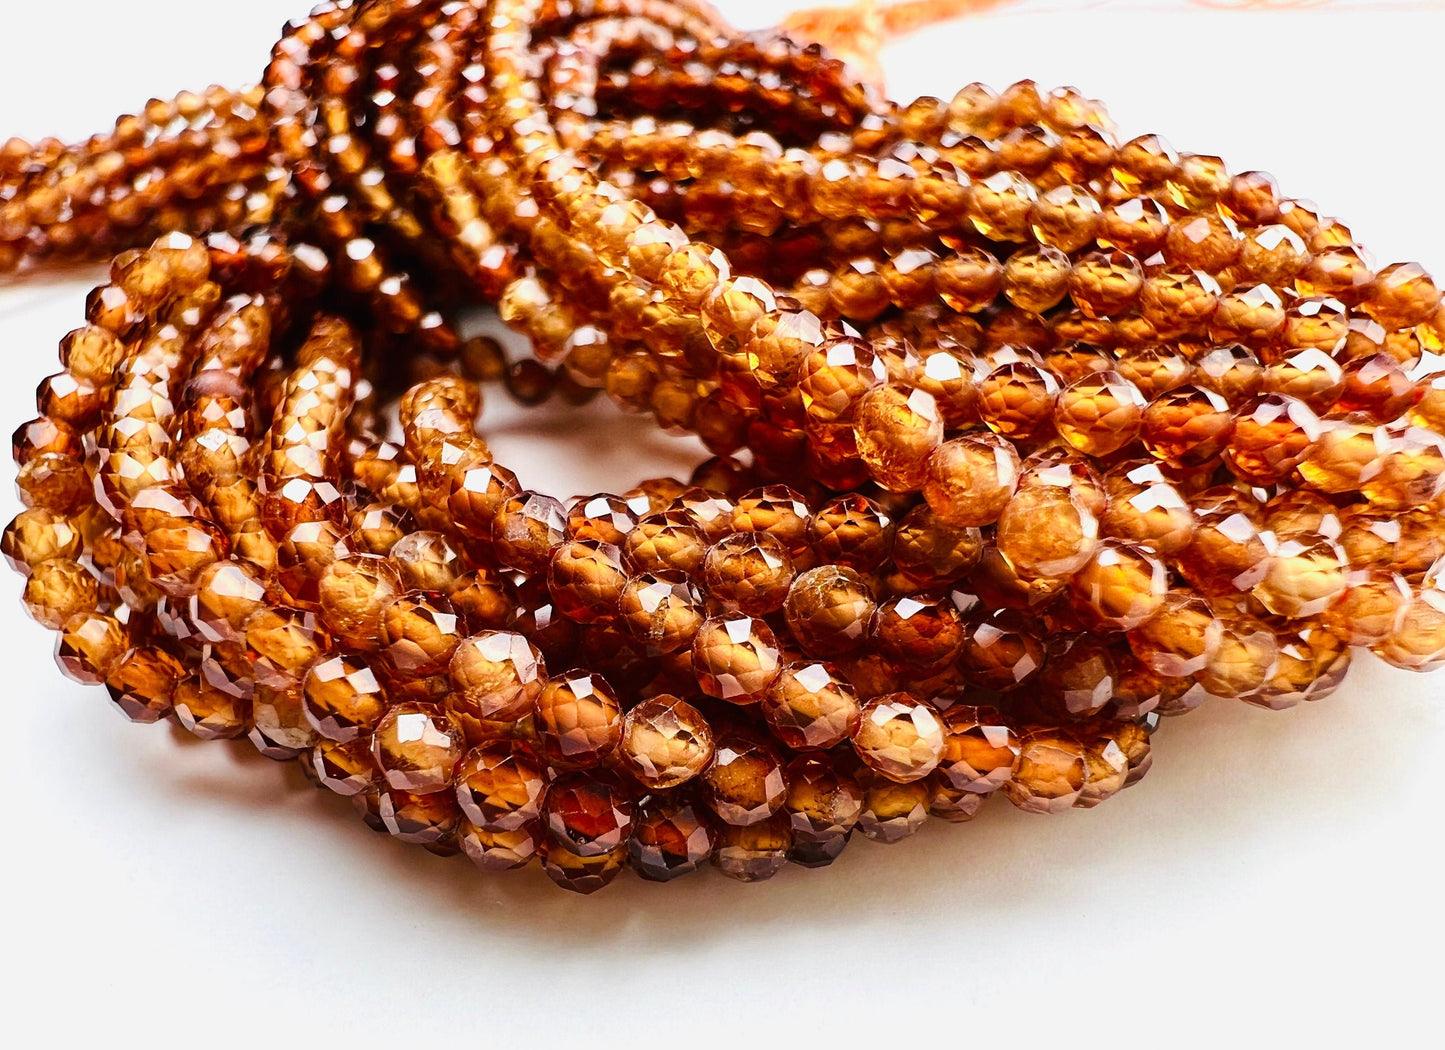 Brown Zirconia Micro Faceted 2mm Round shaded AAA quality Gemstone Jewelry Making Beads 15.5” Strand